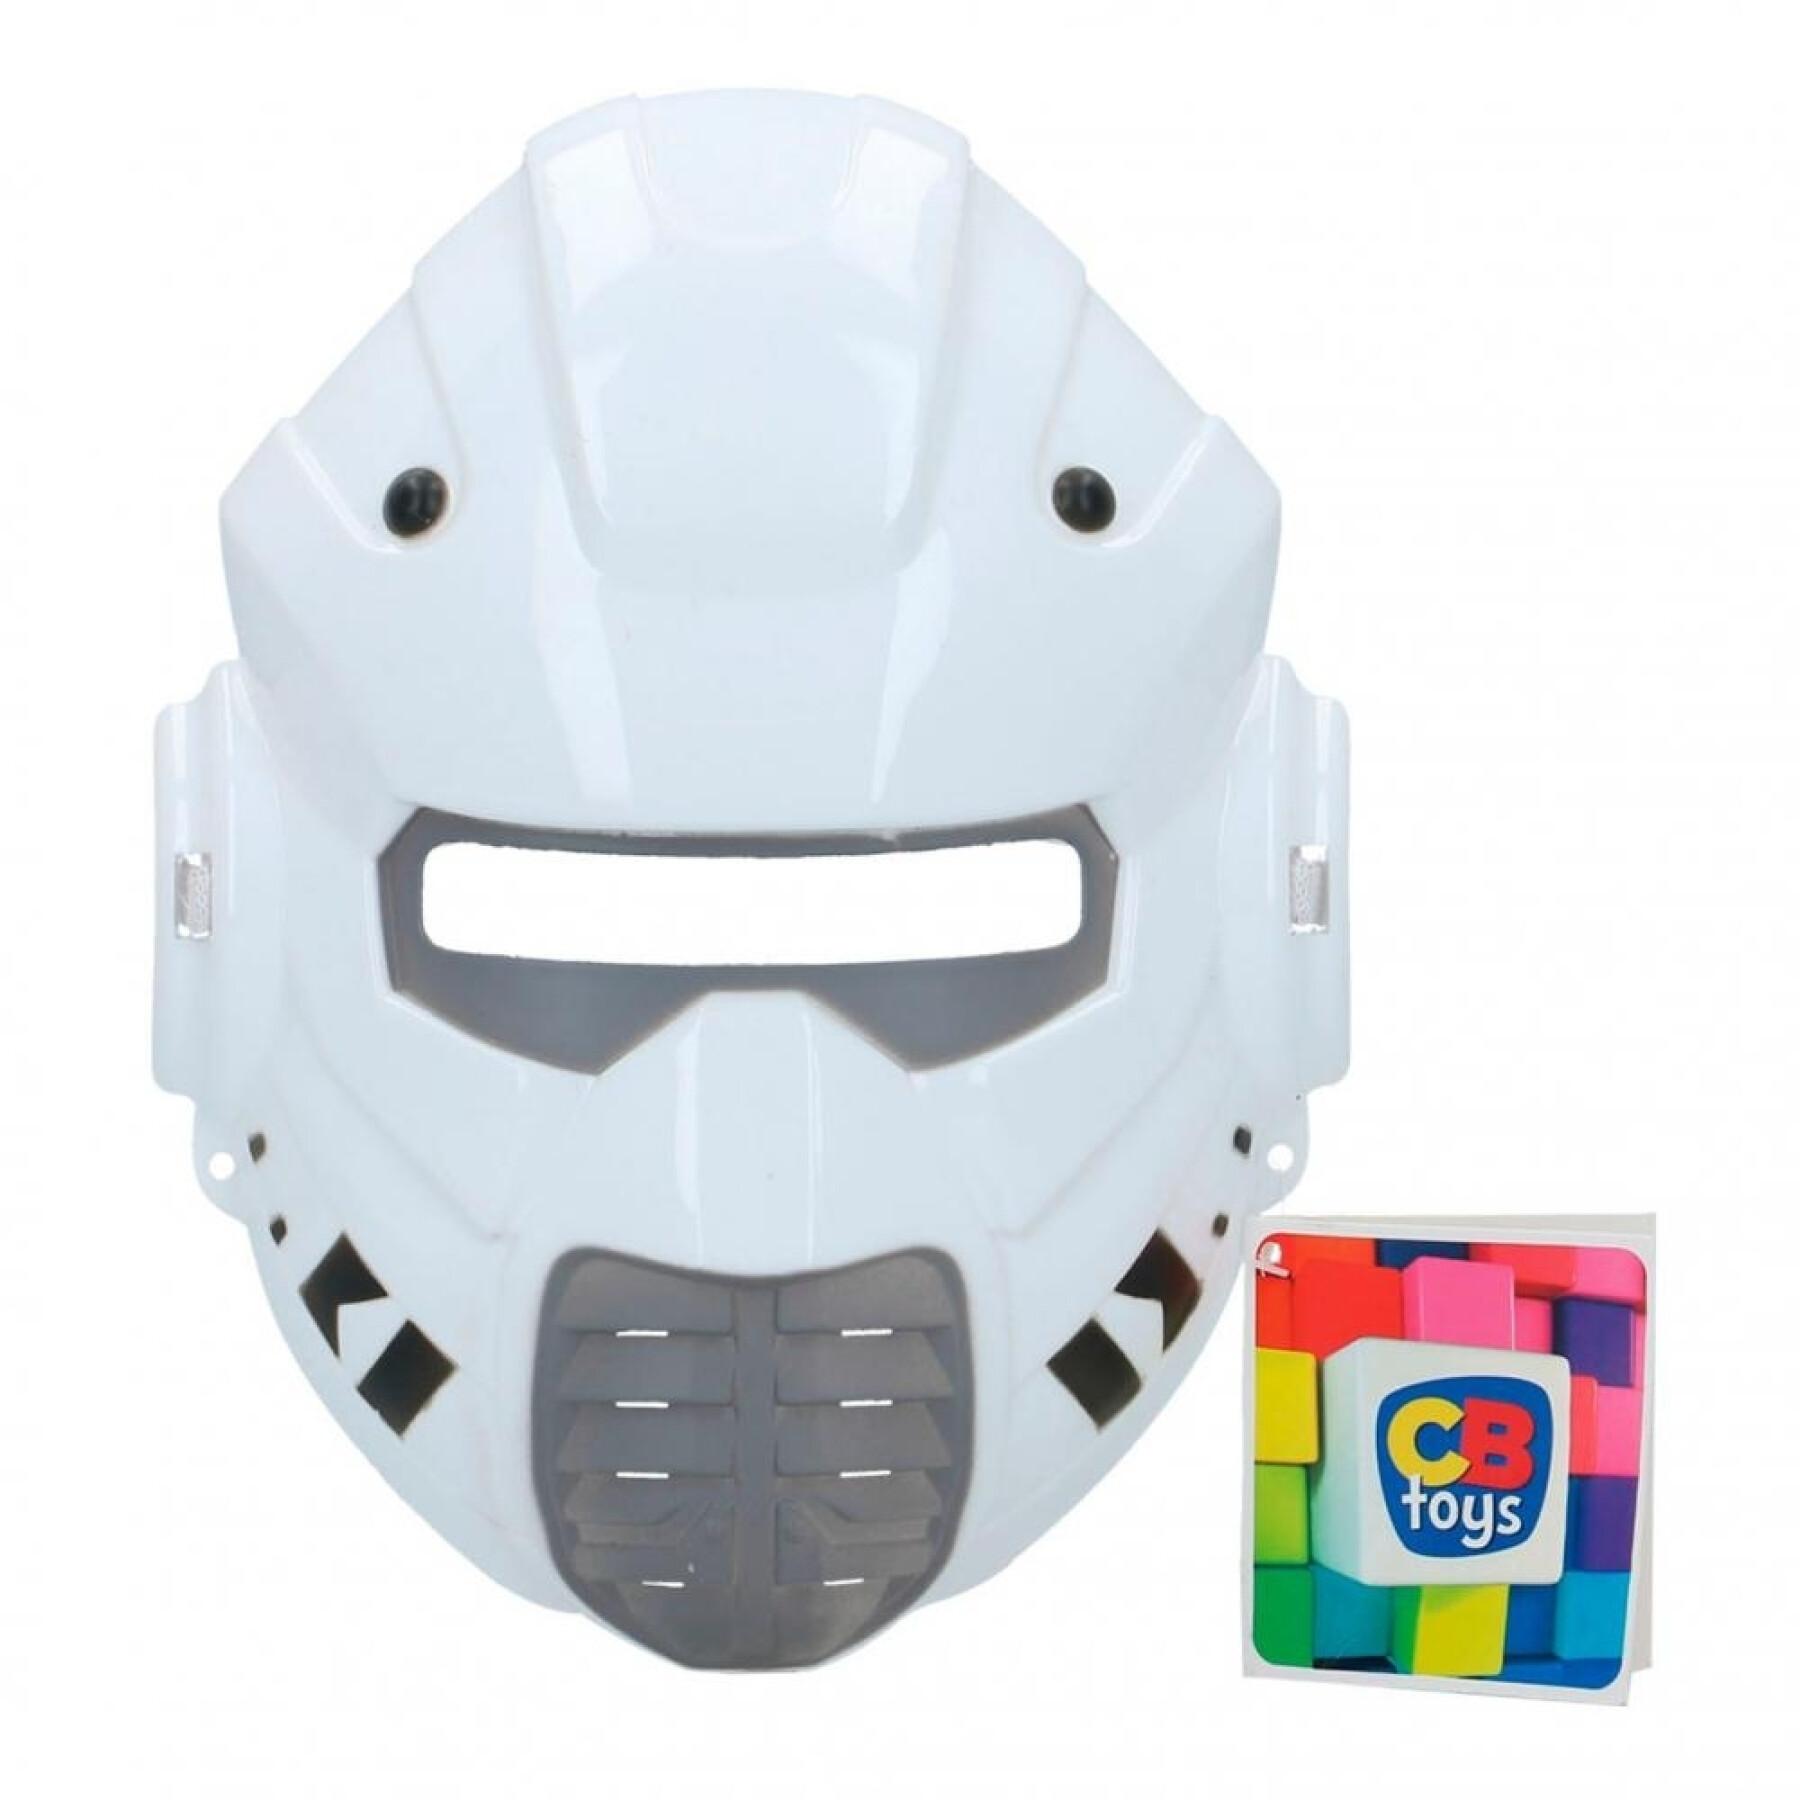 Disguise mask guardian of space CB Toys 22 cm